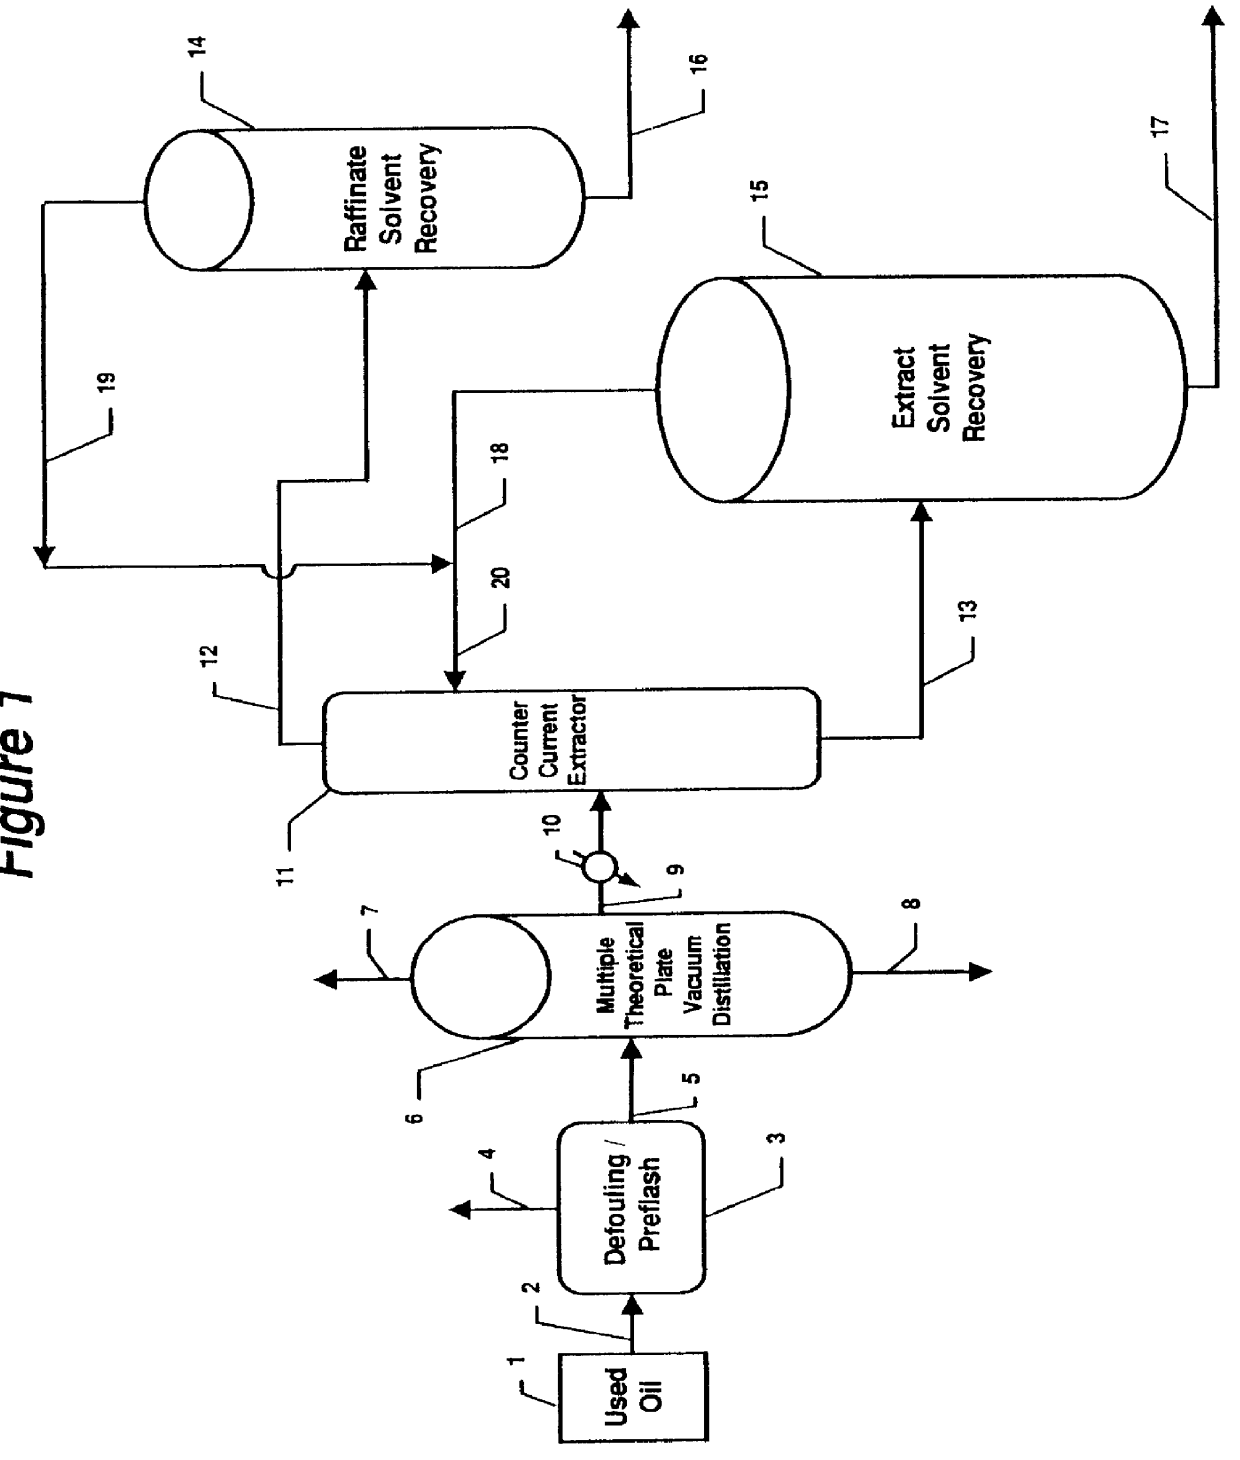 Method of rerefining waste oil by distillation and extraction